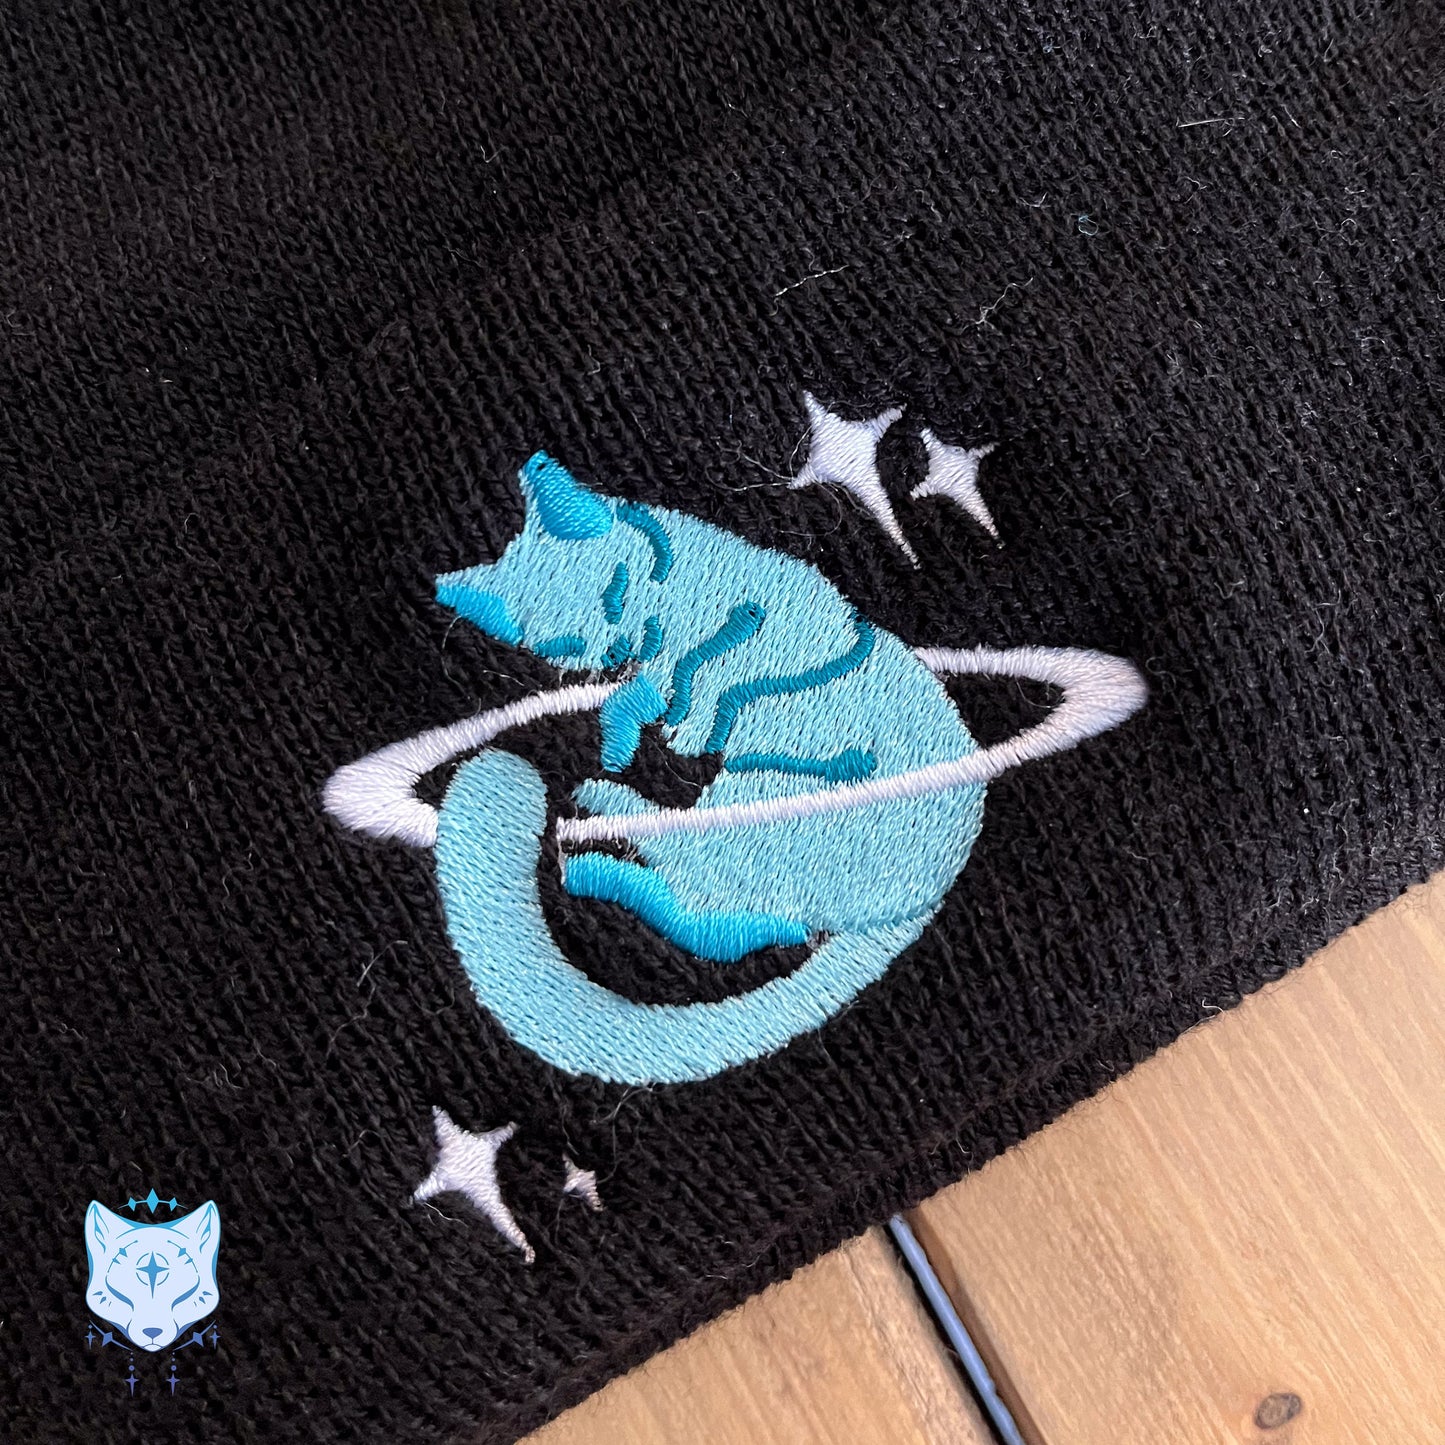 Space Cat Beanie Hat - Fleece Lined Bobble or Thinsulate beanie